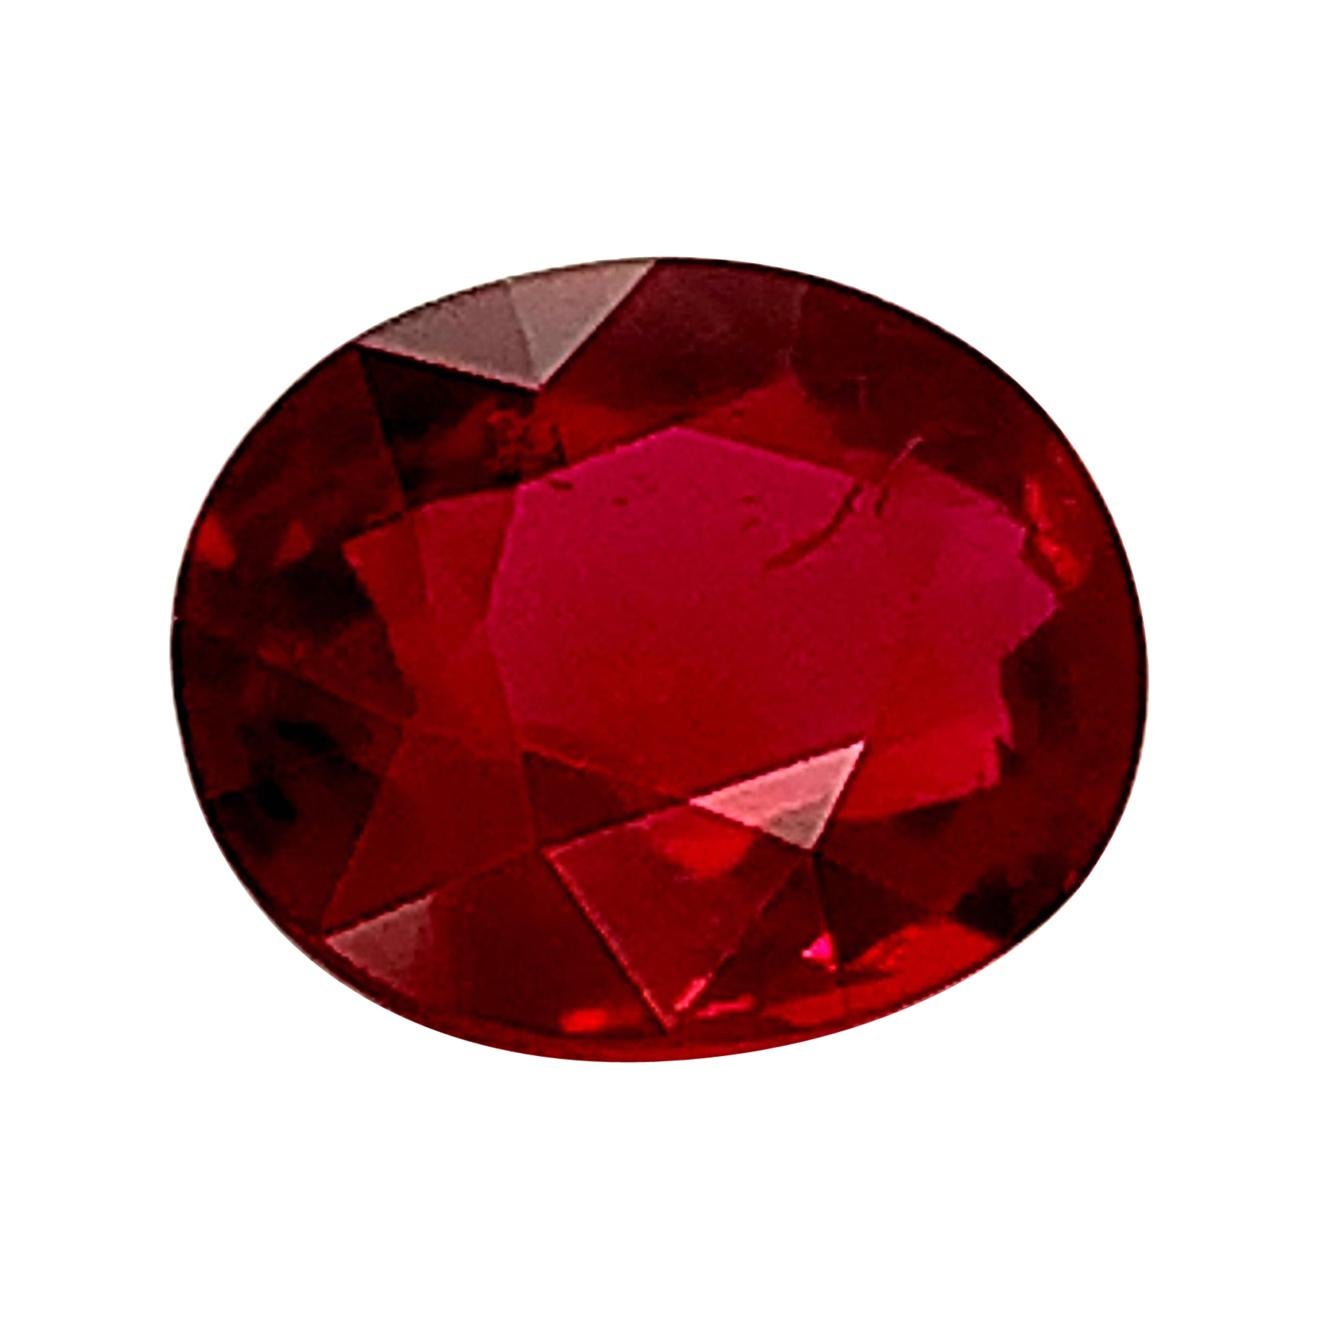 Unheated 3.05 Carat “Pigeon’s Blood” Ruby, Unset Loose Gemstone, GIA Certified